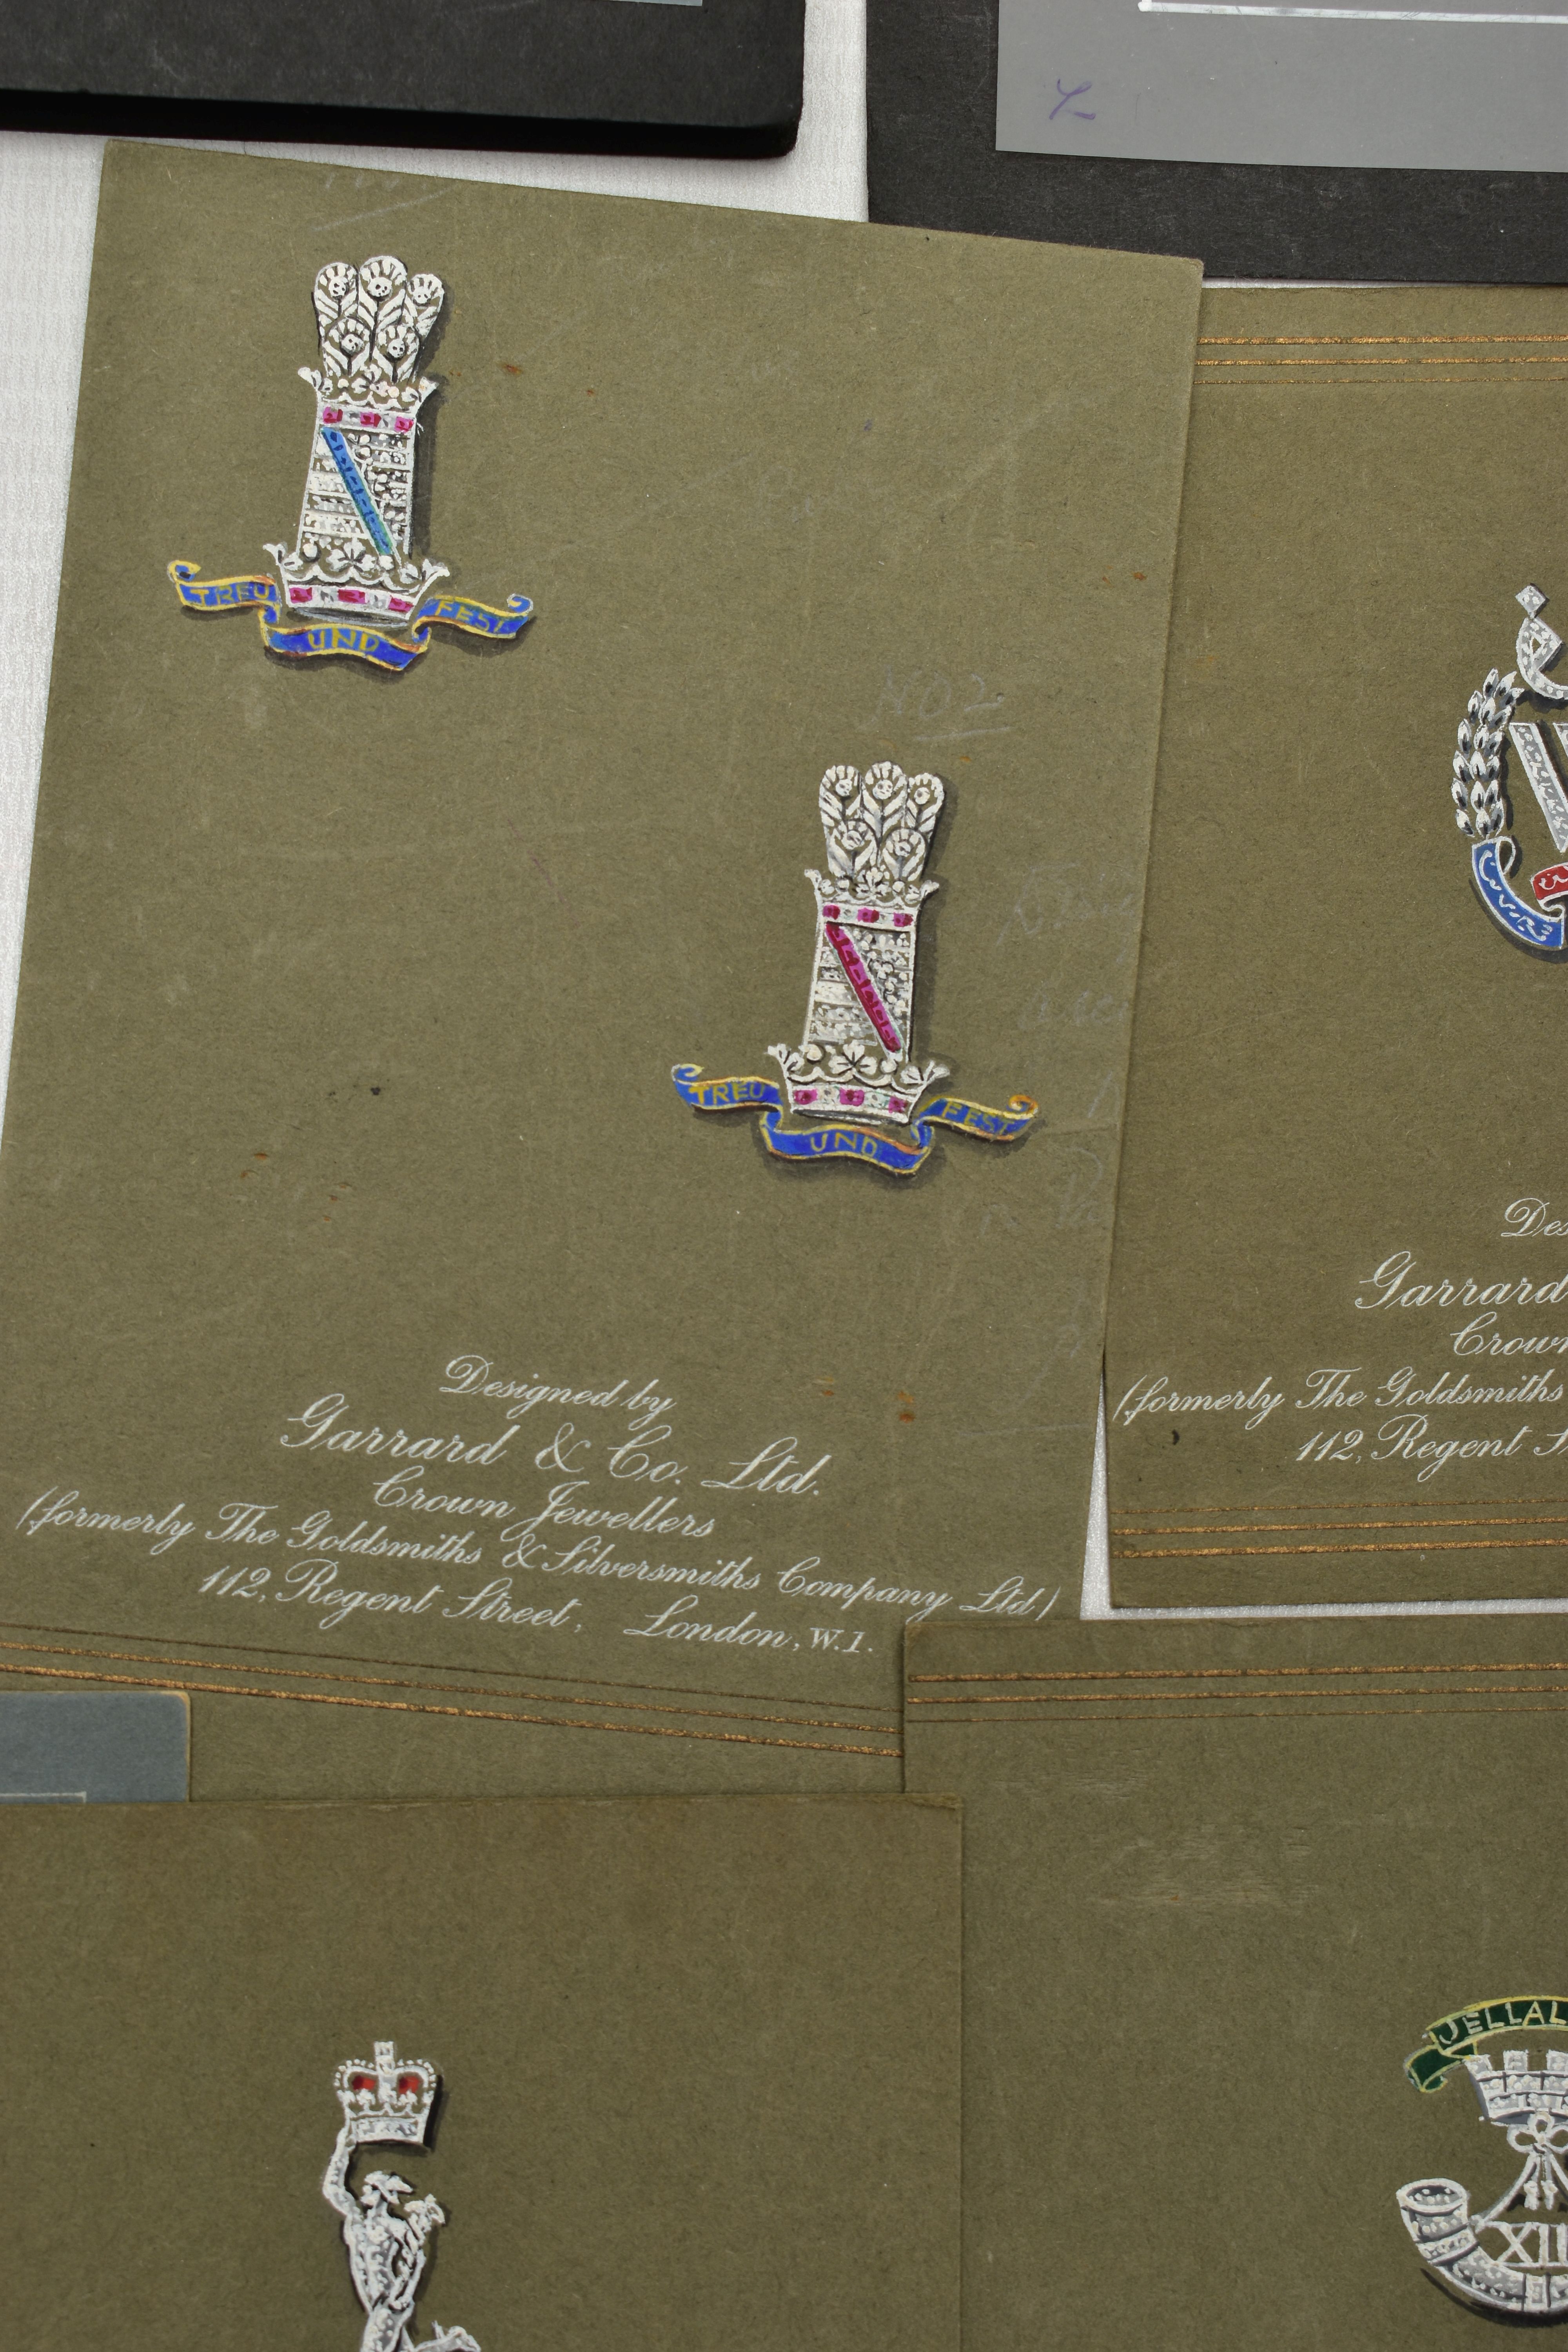 A COLLECTION OF 'GARRARD & CO LTD' EARLY TO MID 20TH CENTURY GOUACHE JEWELLERY DESIGN ILLUSTRATIONS, - Image 8 of 12